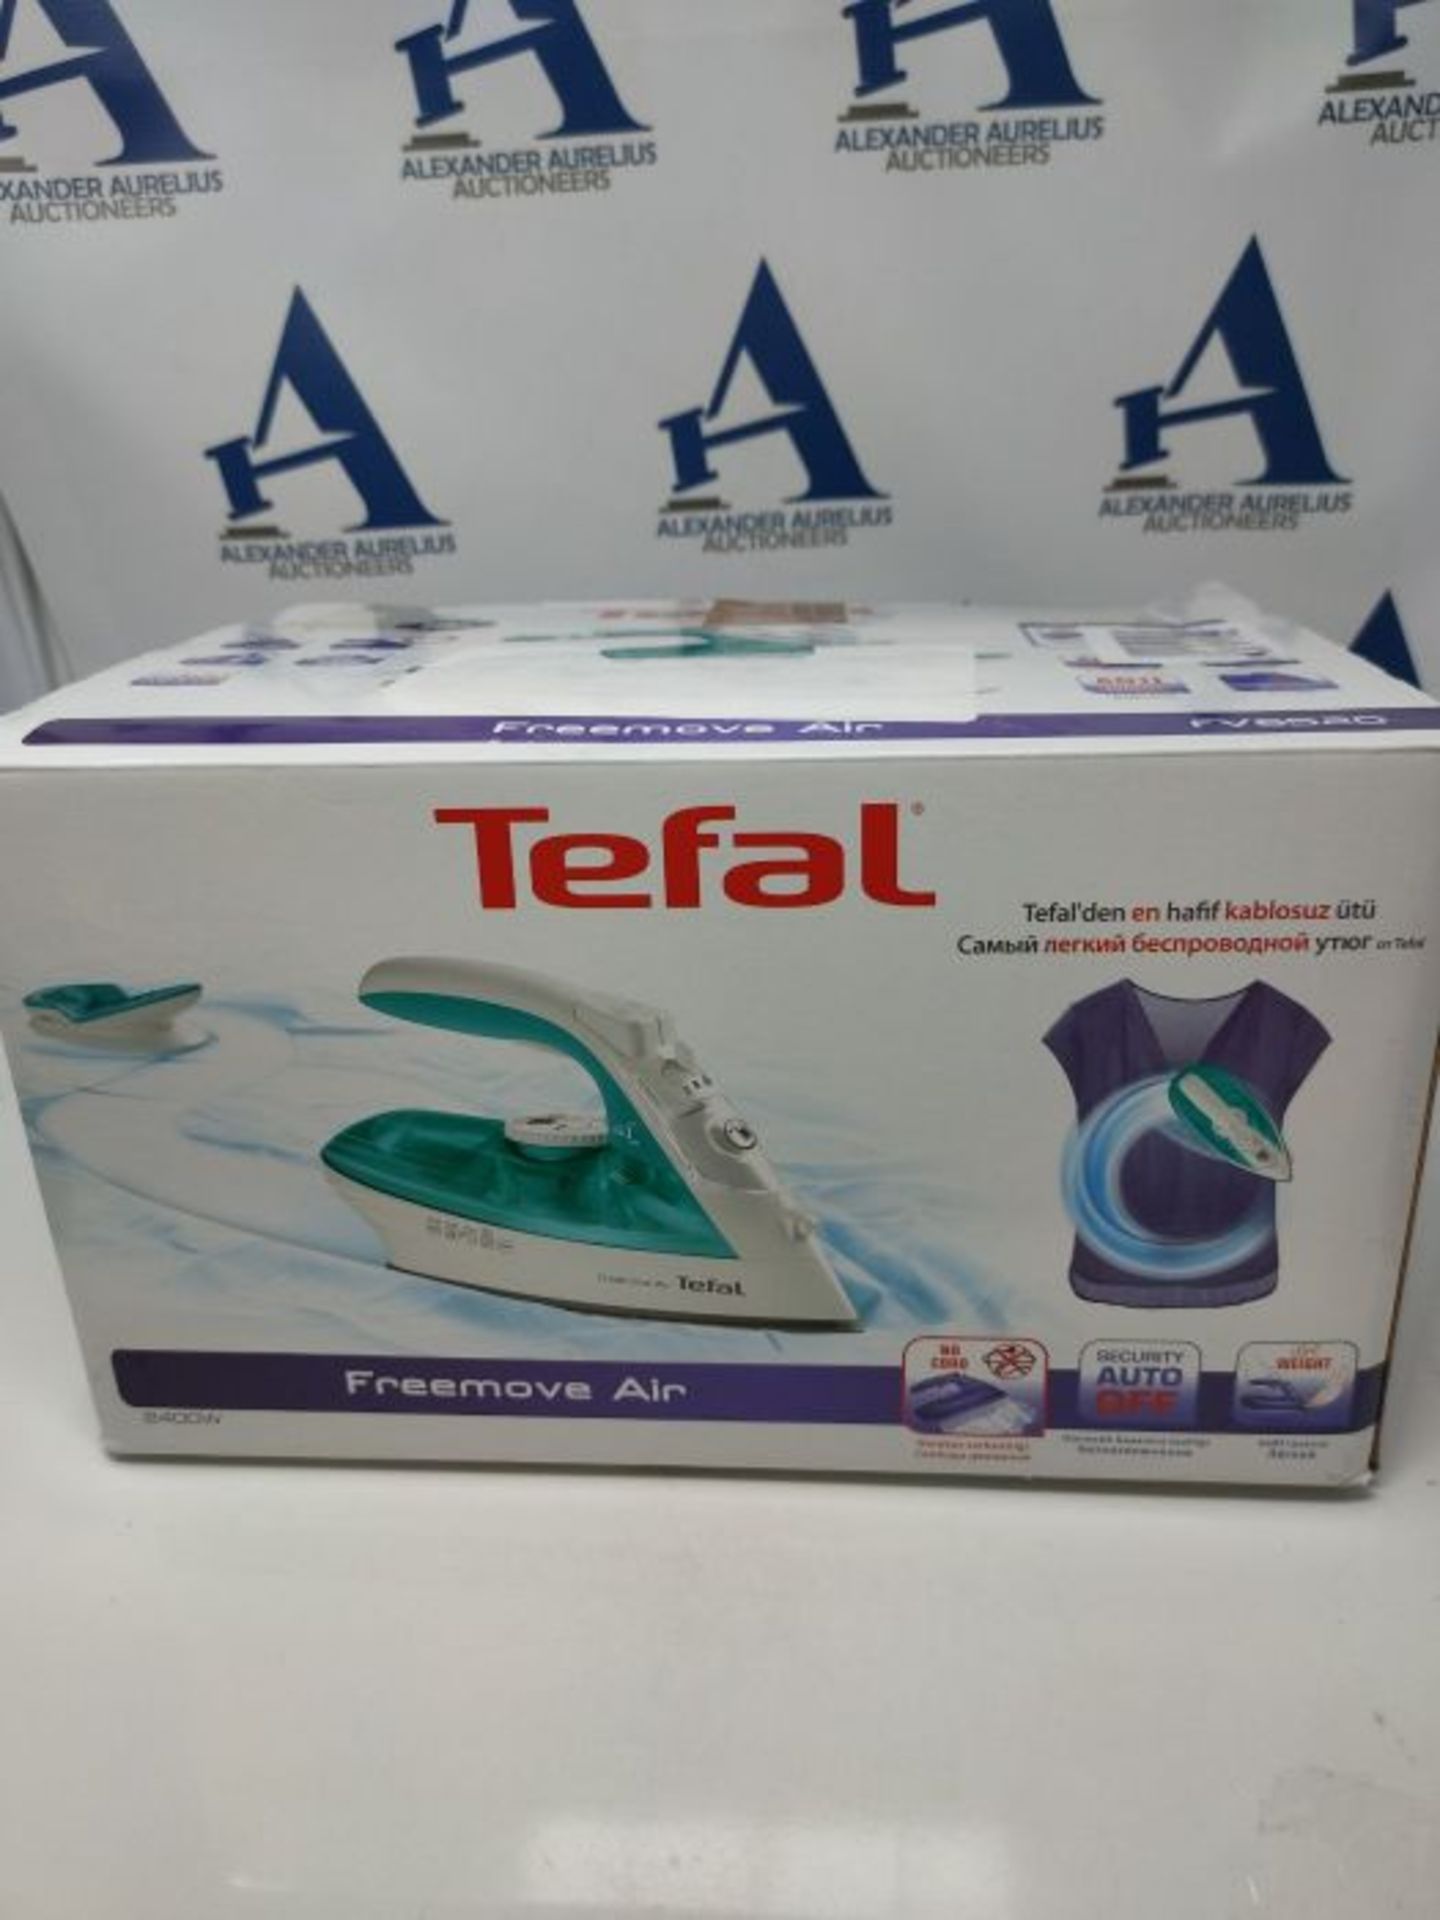 RRP £62.00 Tefal Cordless Steam Iron, Freemove Air, 2400 W, Blue, FV6520G0, 0.25L - Image 2 of 3